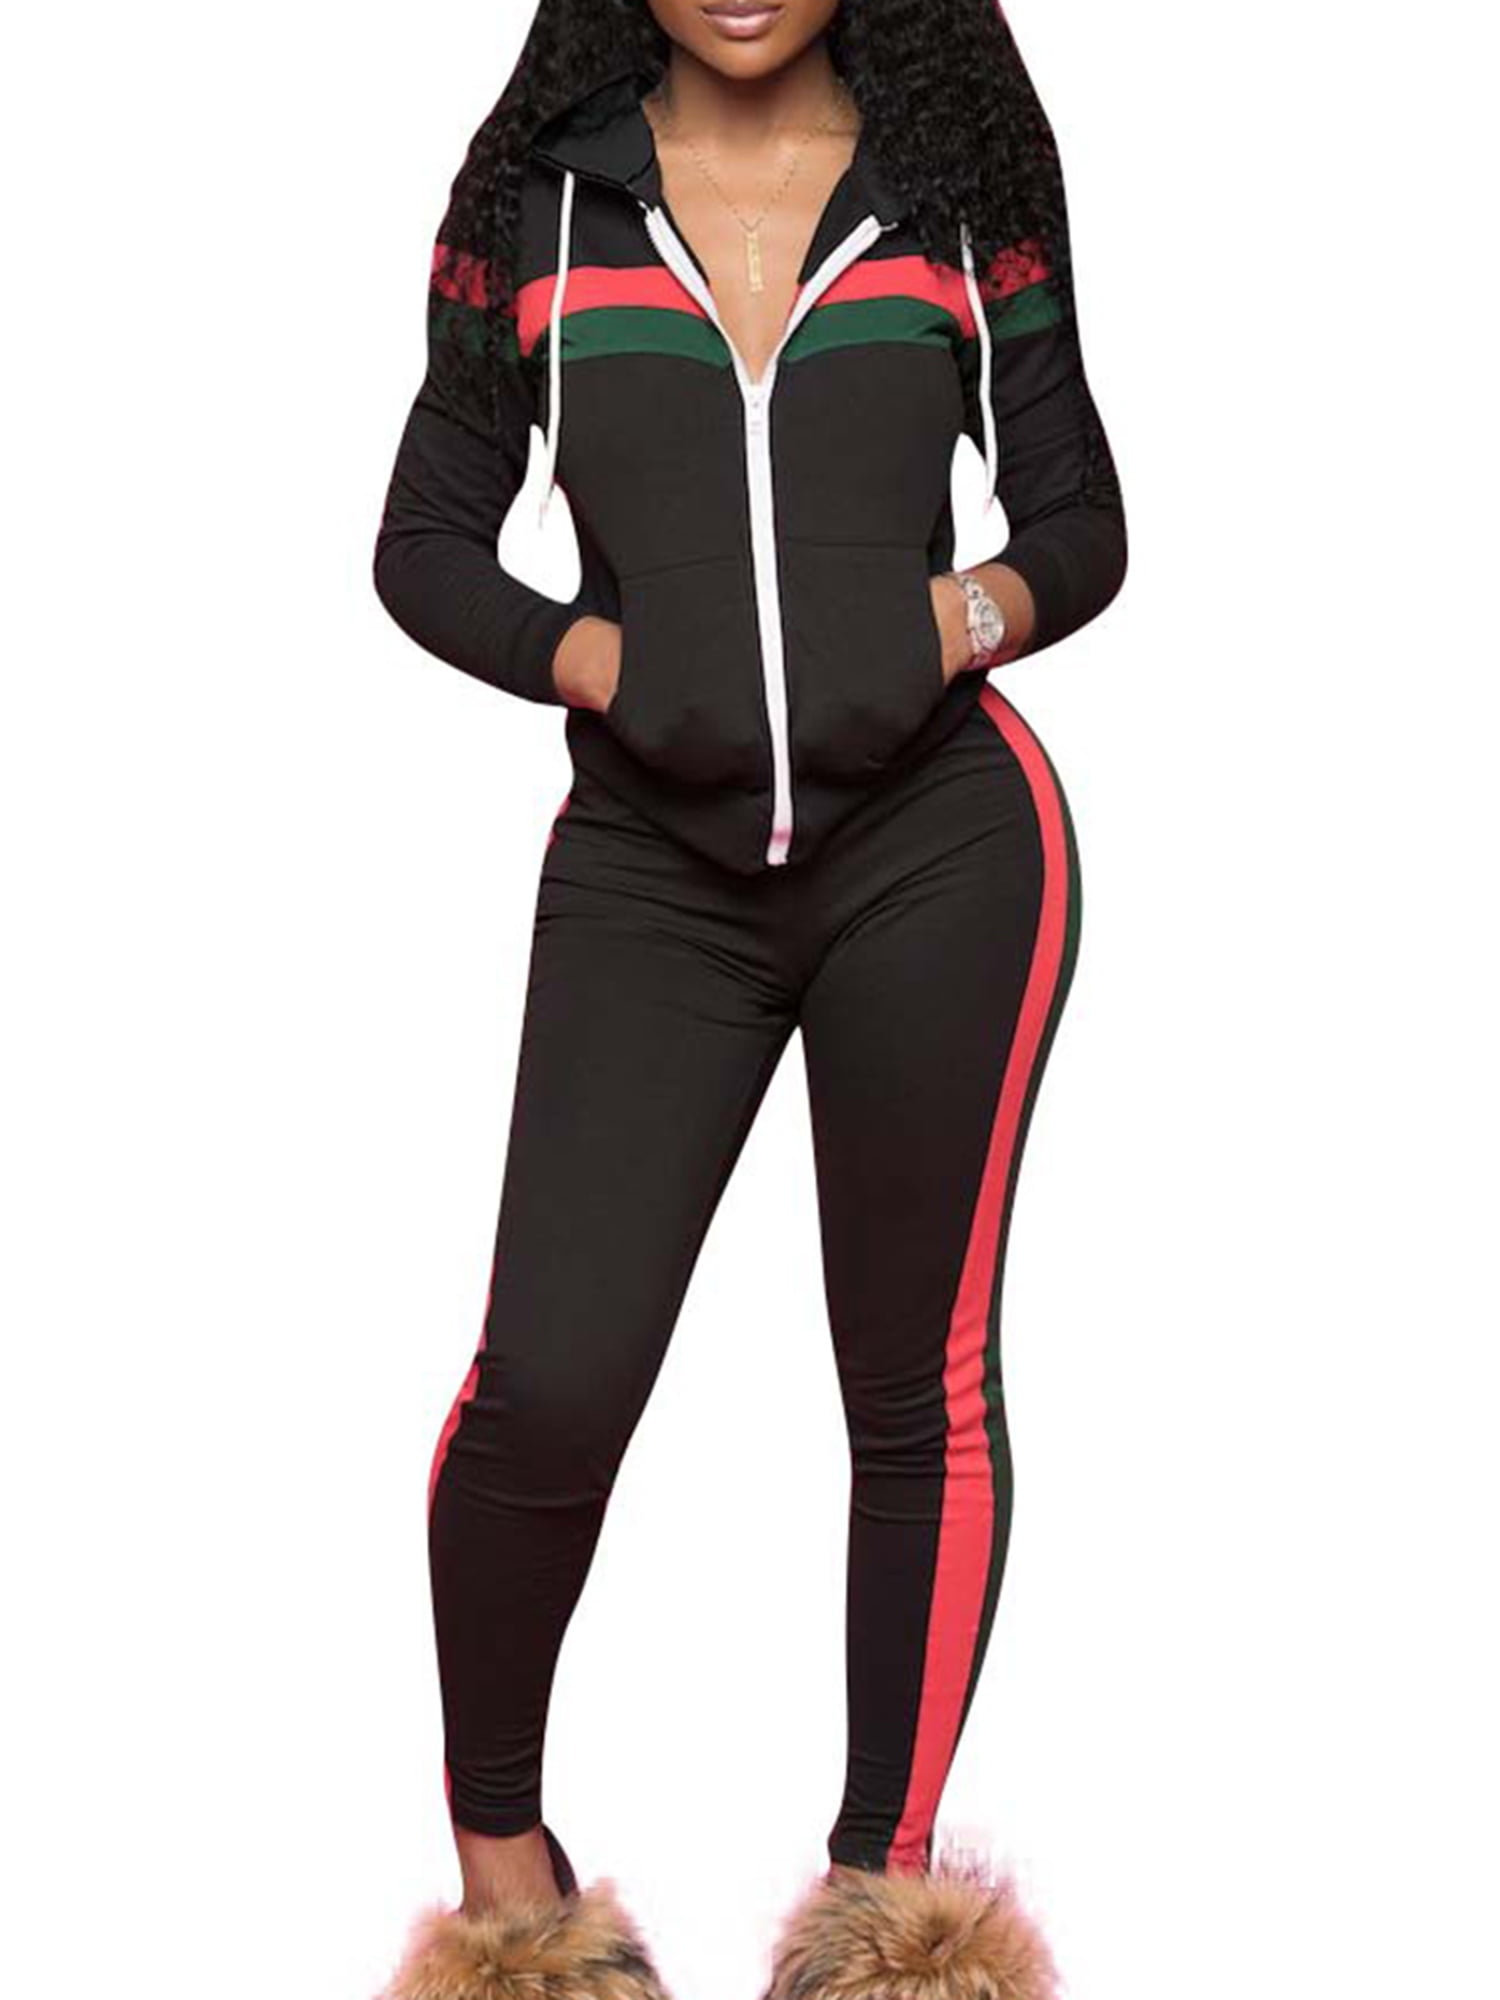 Rikay GIA Hoodies 2 Pcs Stripe Printed Long Sleeve Pullover Hooded Sweatshirts with Pants Set Sale Size 8-14 